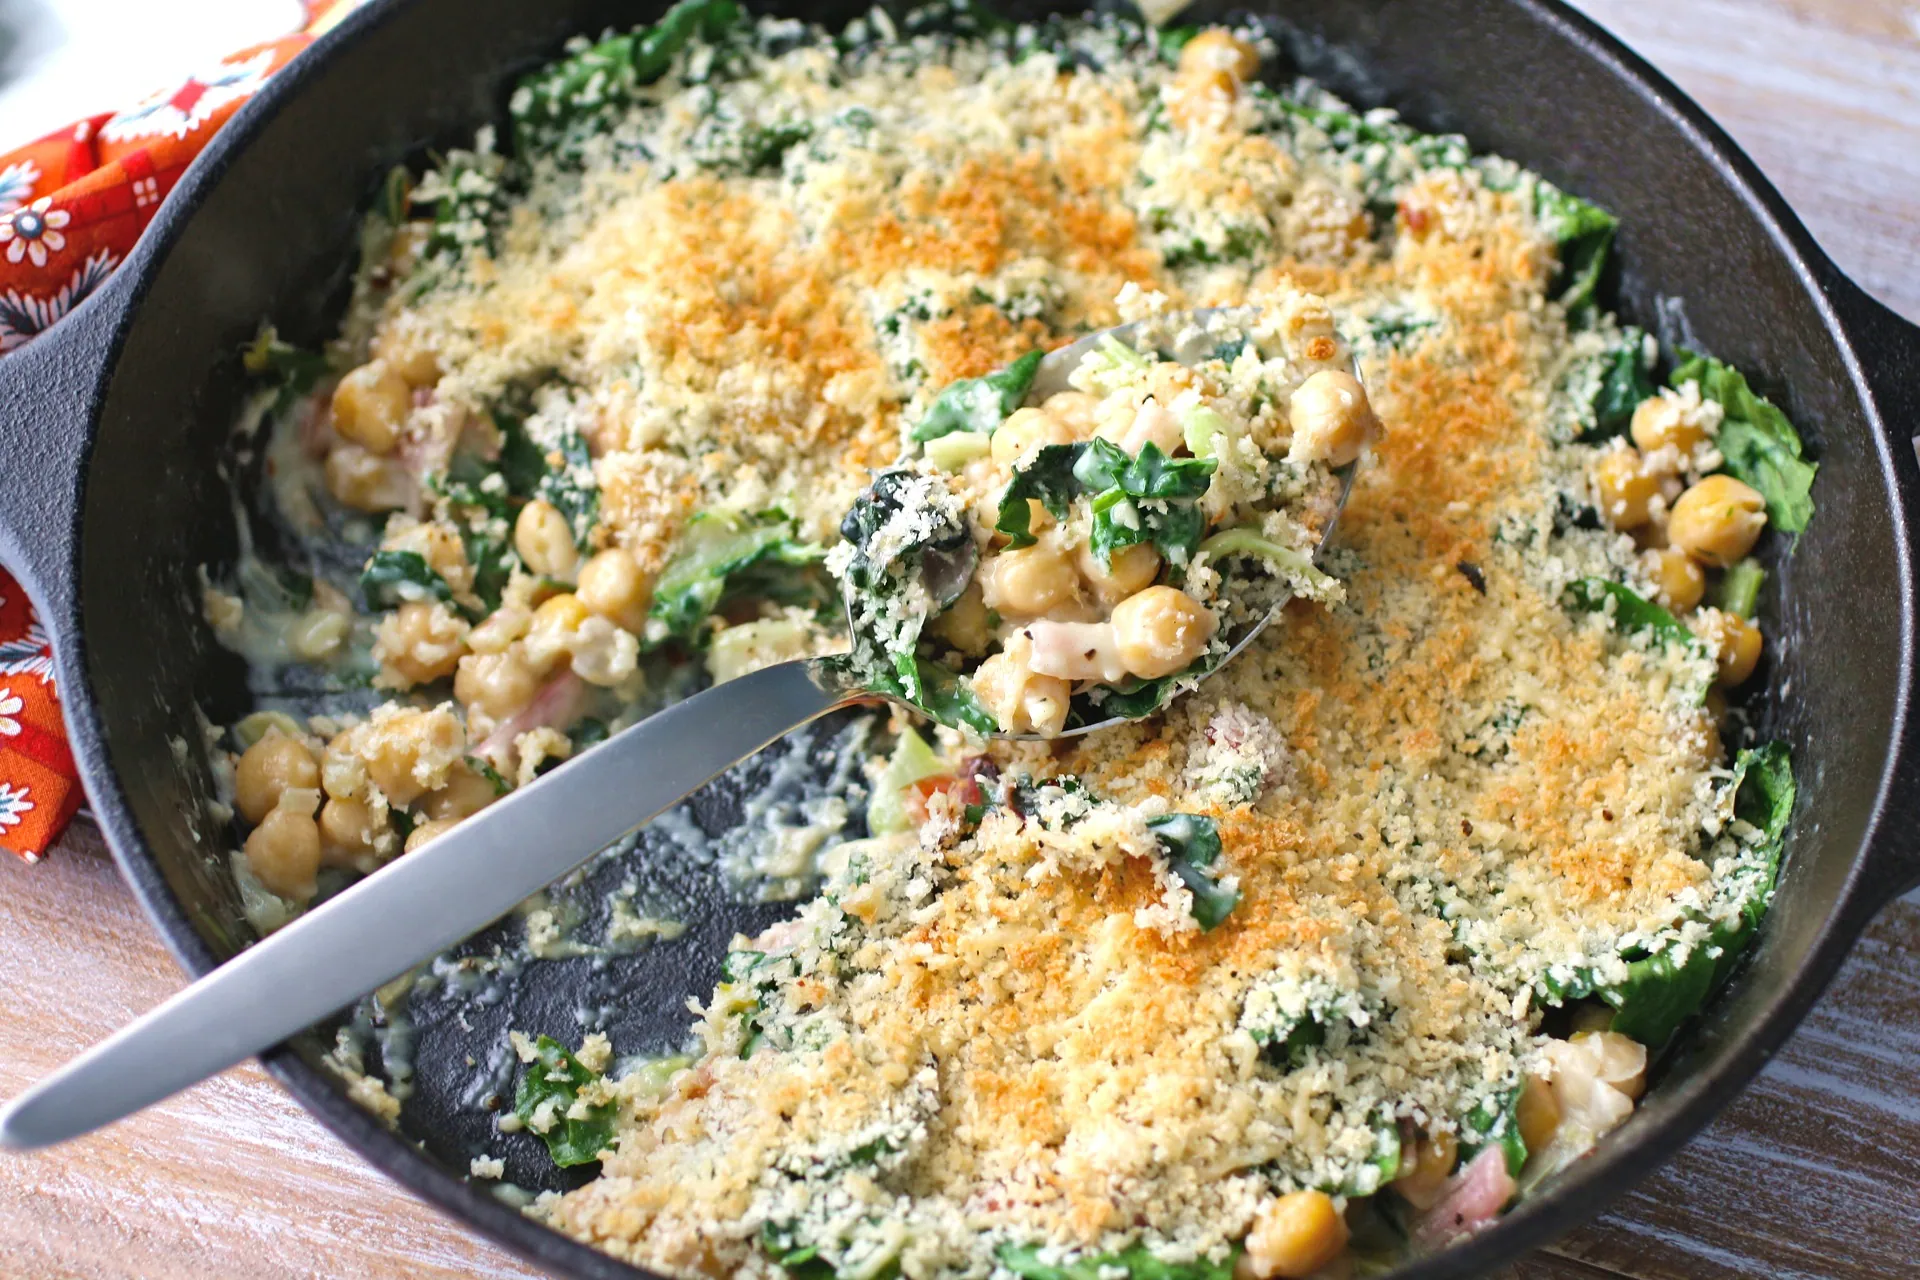 Creamy Skillet Swiss Charad and Chickpeas with Crunchy Breadcrumbs